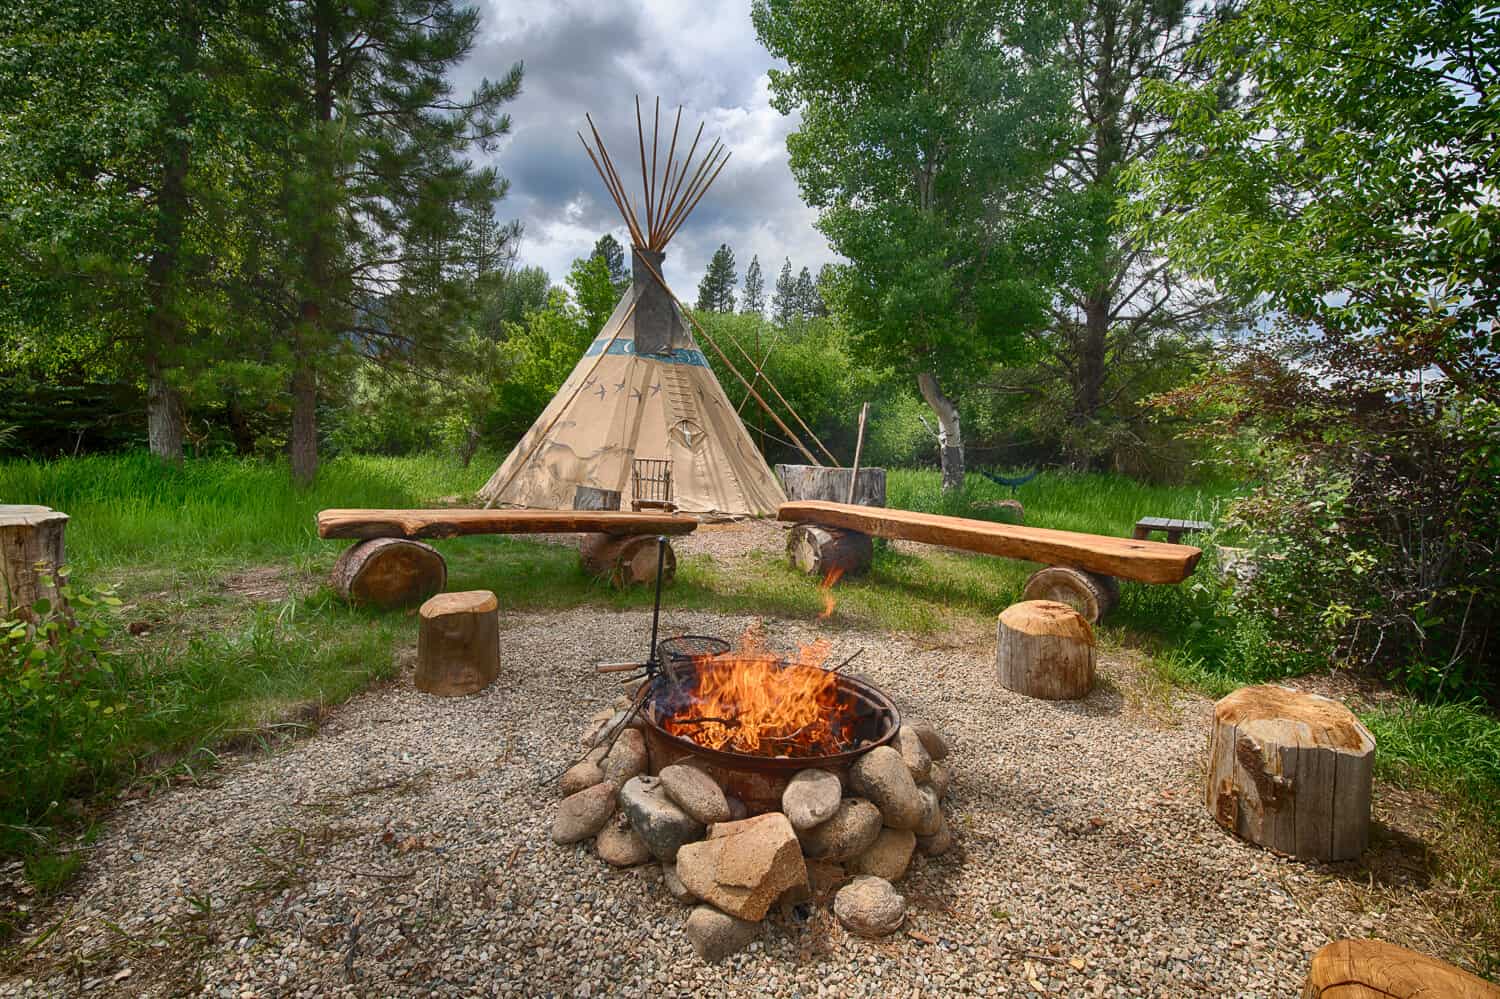 Authentic tipi in a teepee campground in Garden Valley, Idaho. Campfire burning in foreground at the firepit.